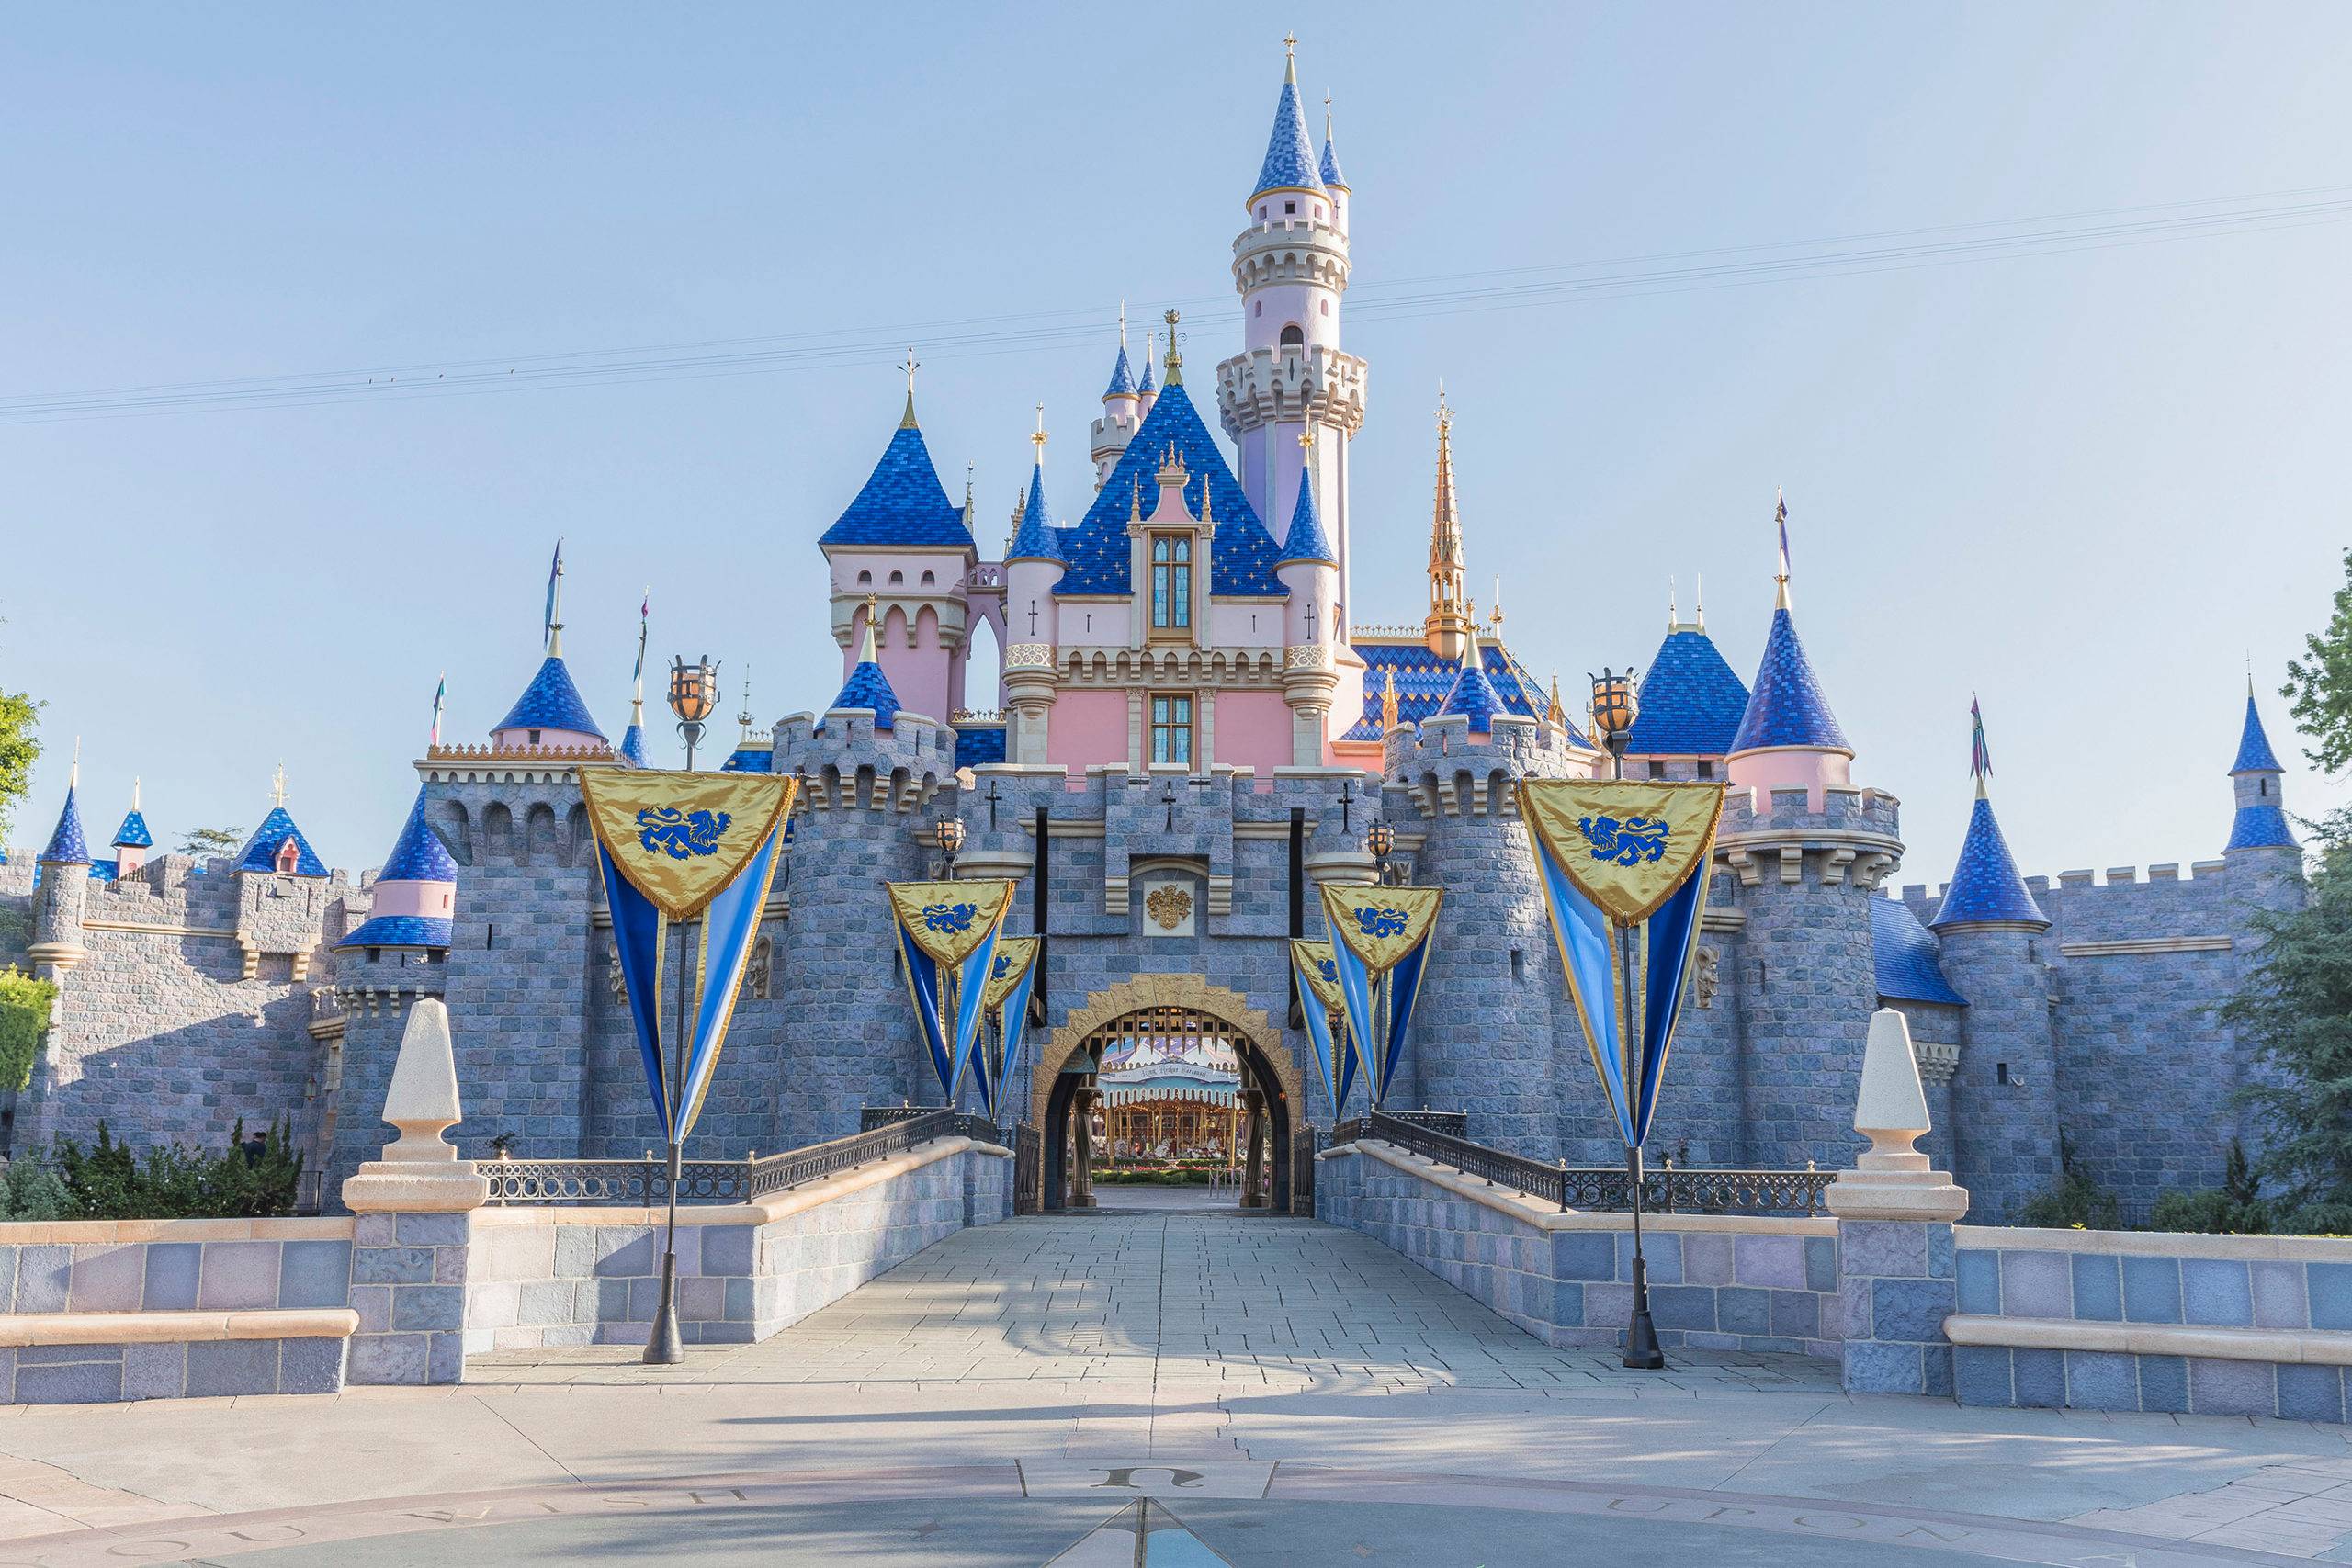 Disneyland Resort to allow guests from outside of California and expands the park reservation booking window